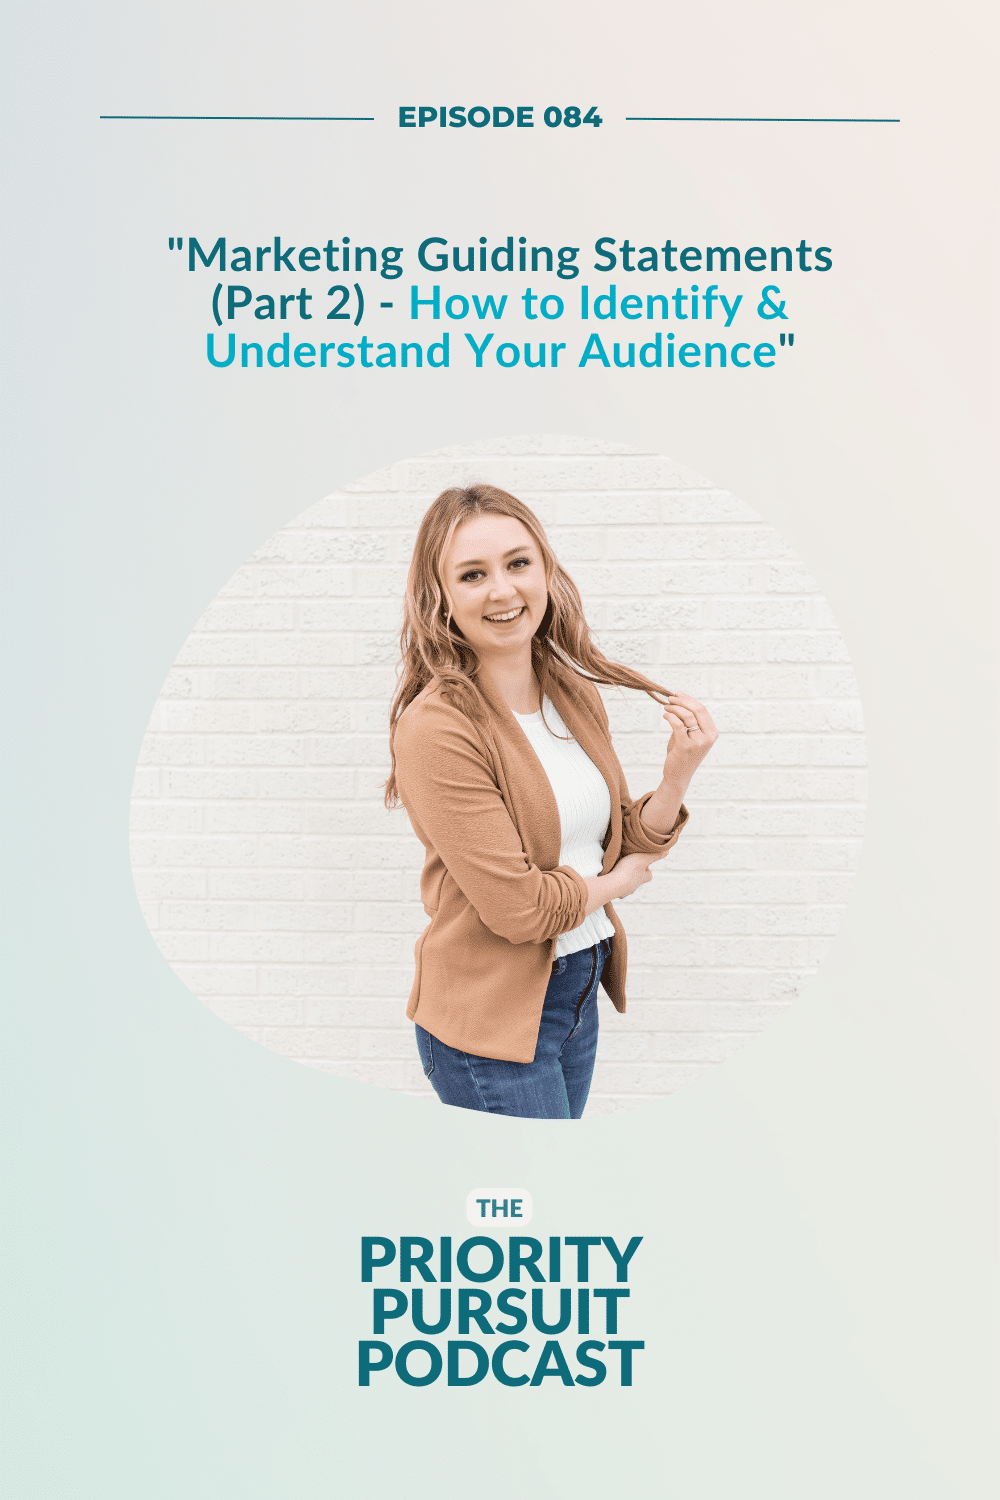 Victoria Rayburn of Treefrog Marketing explains how to identify and understand your ideal client as a small business in this episode of “Priority Pursuit.”